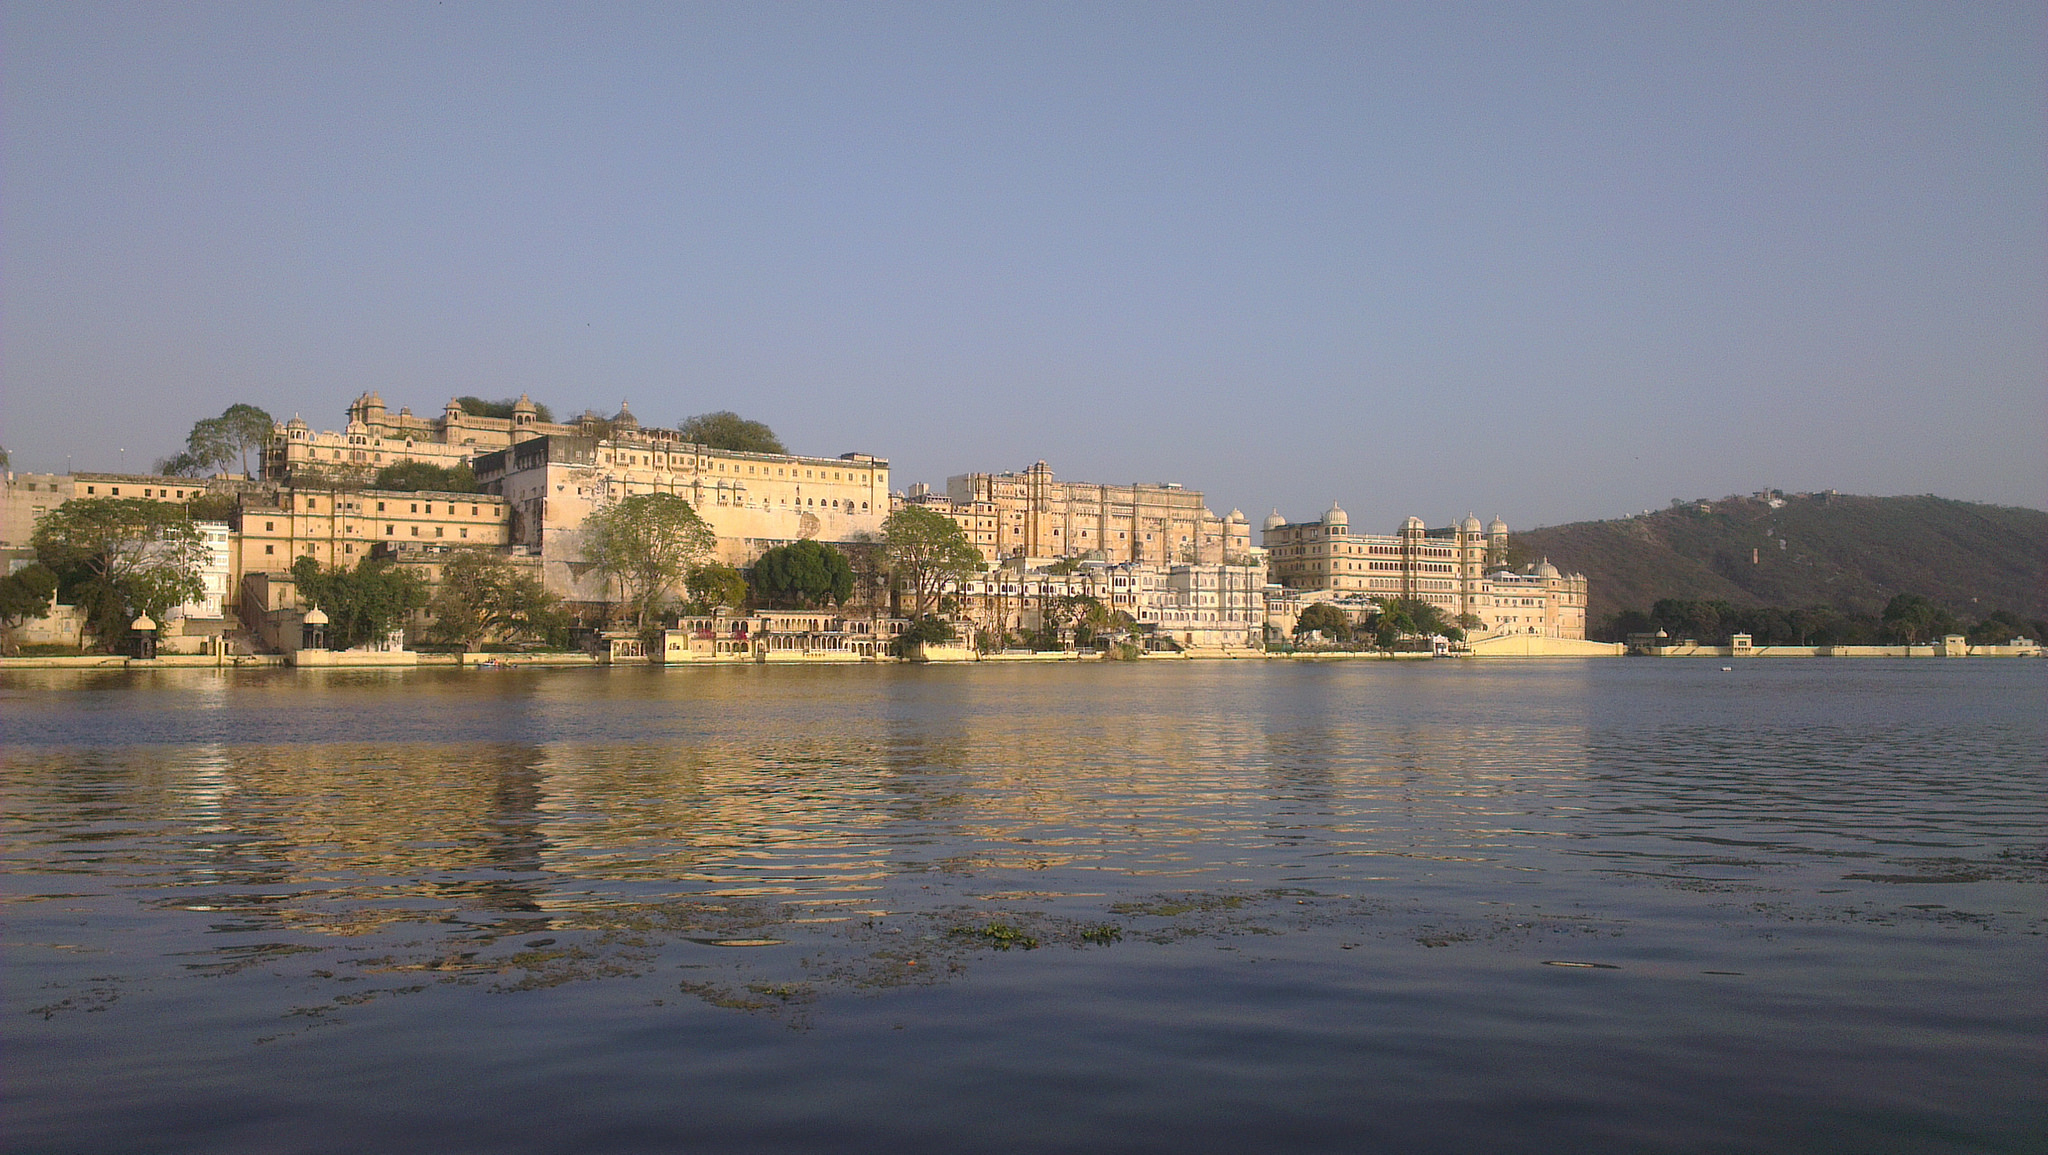 Lake Pichola, Udaipur: A serene lake surrounded by majestic palaces and scenic hills.